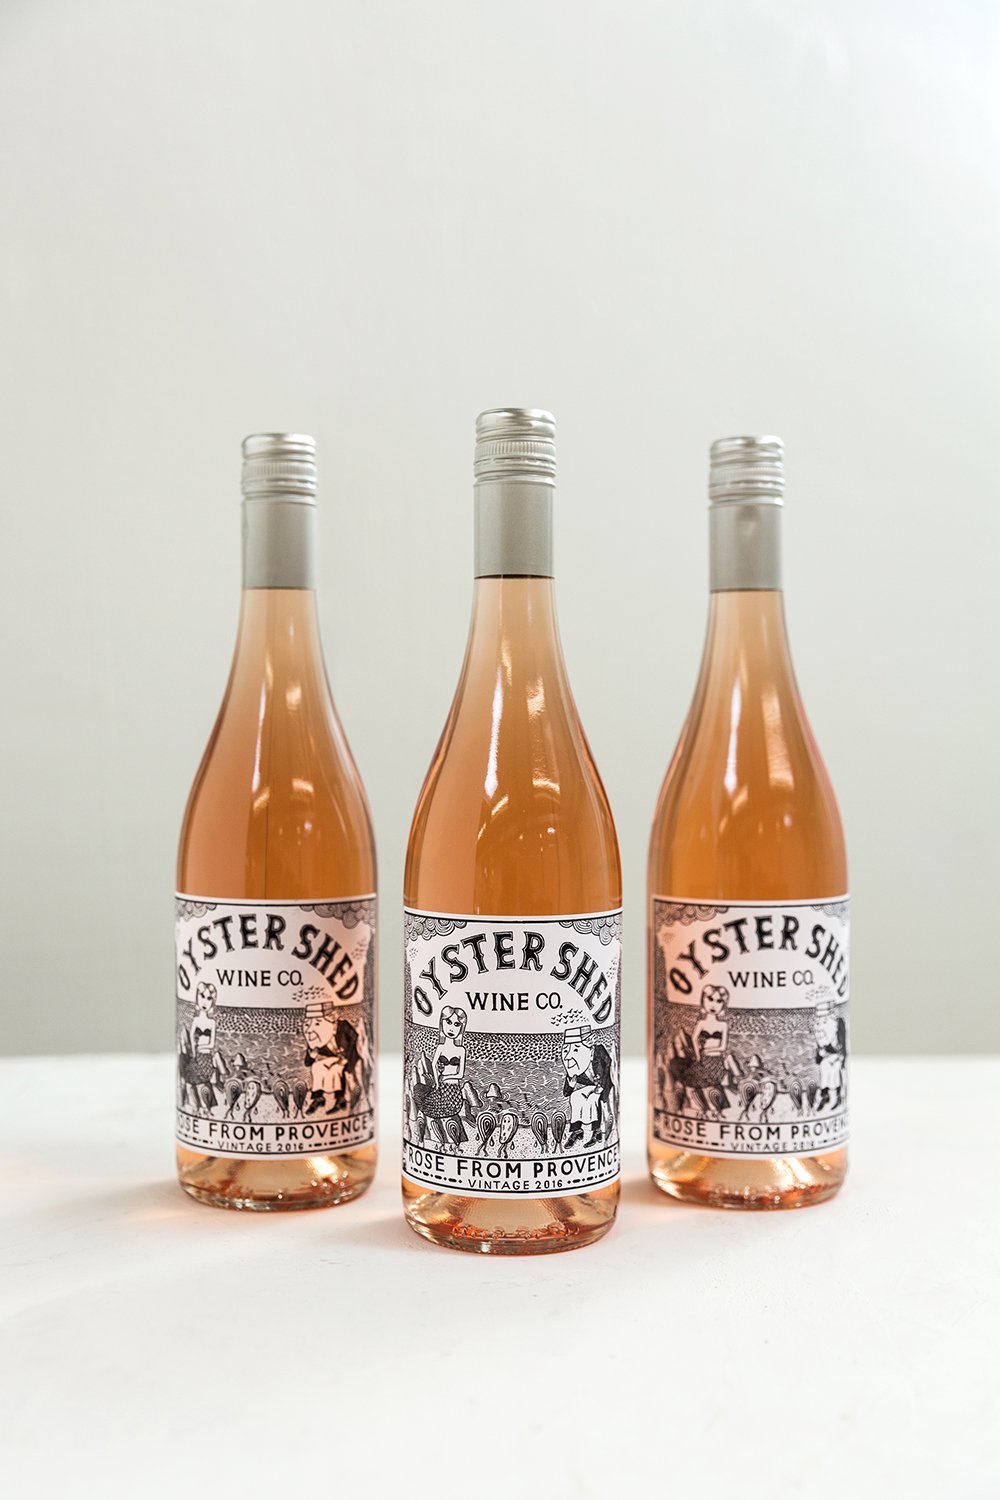 ALABAMA CHANIN – OYSTER SHED ROSE + HARRY ROOT + BROOKS REITZ